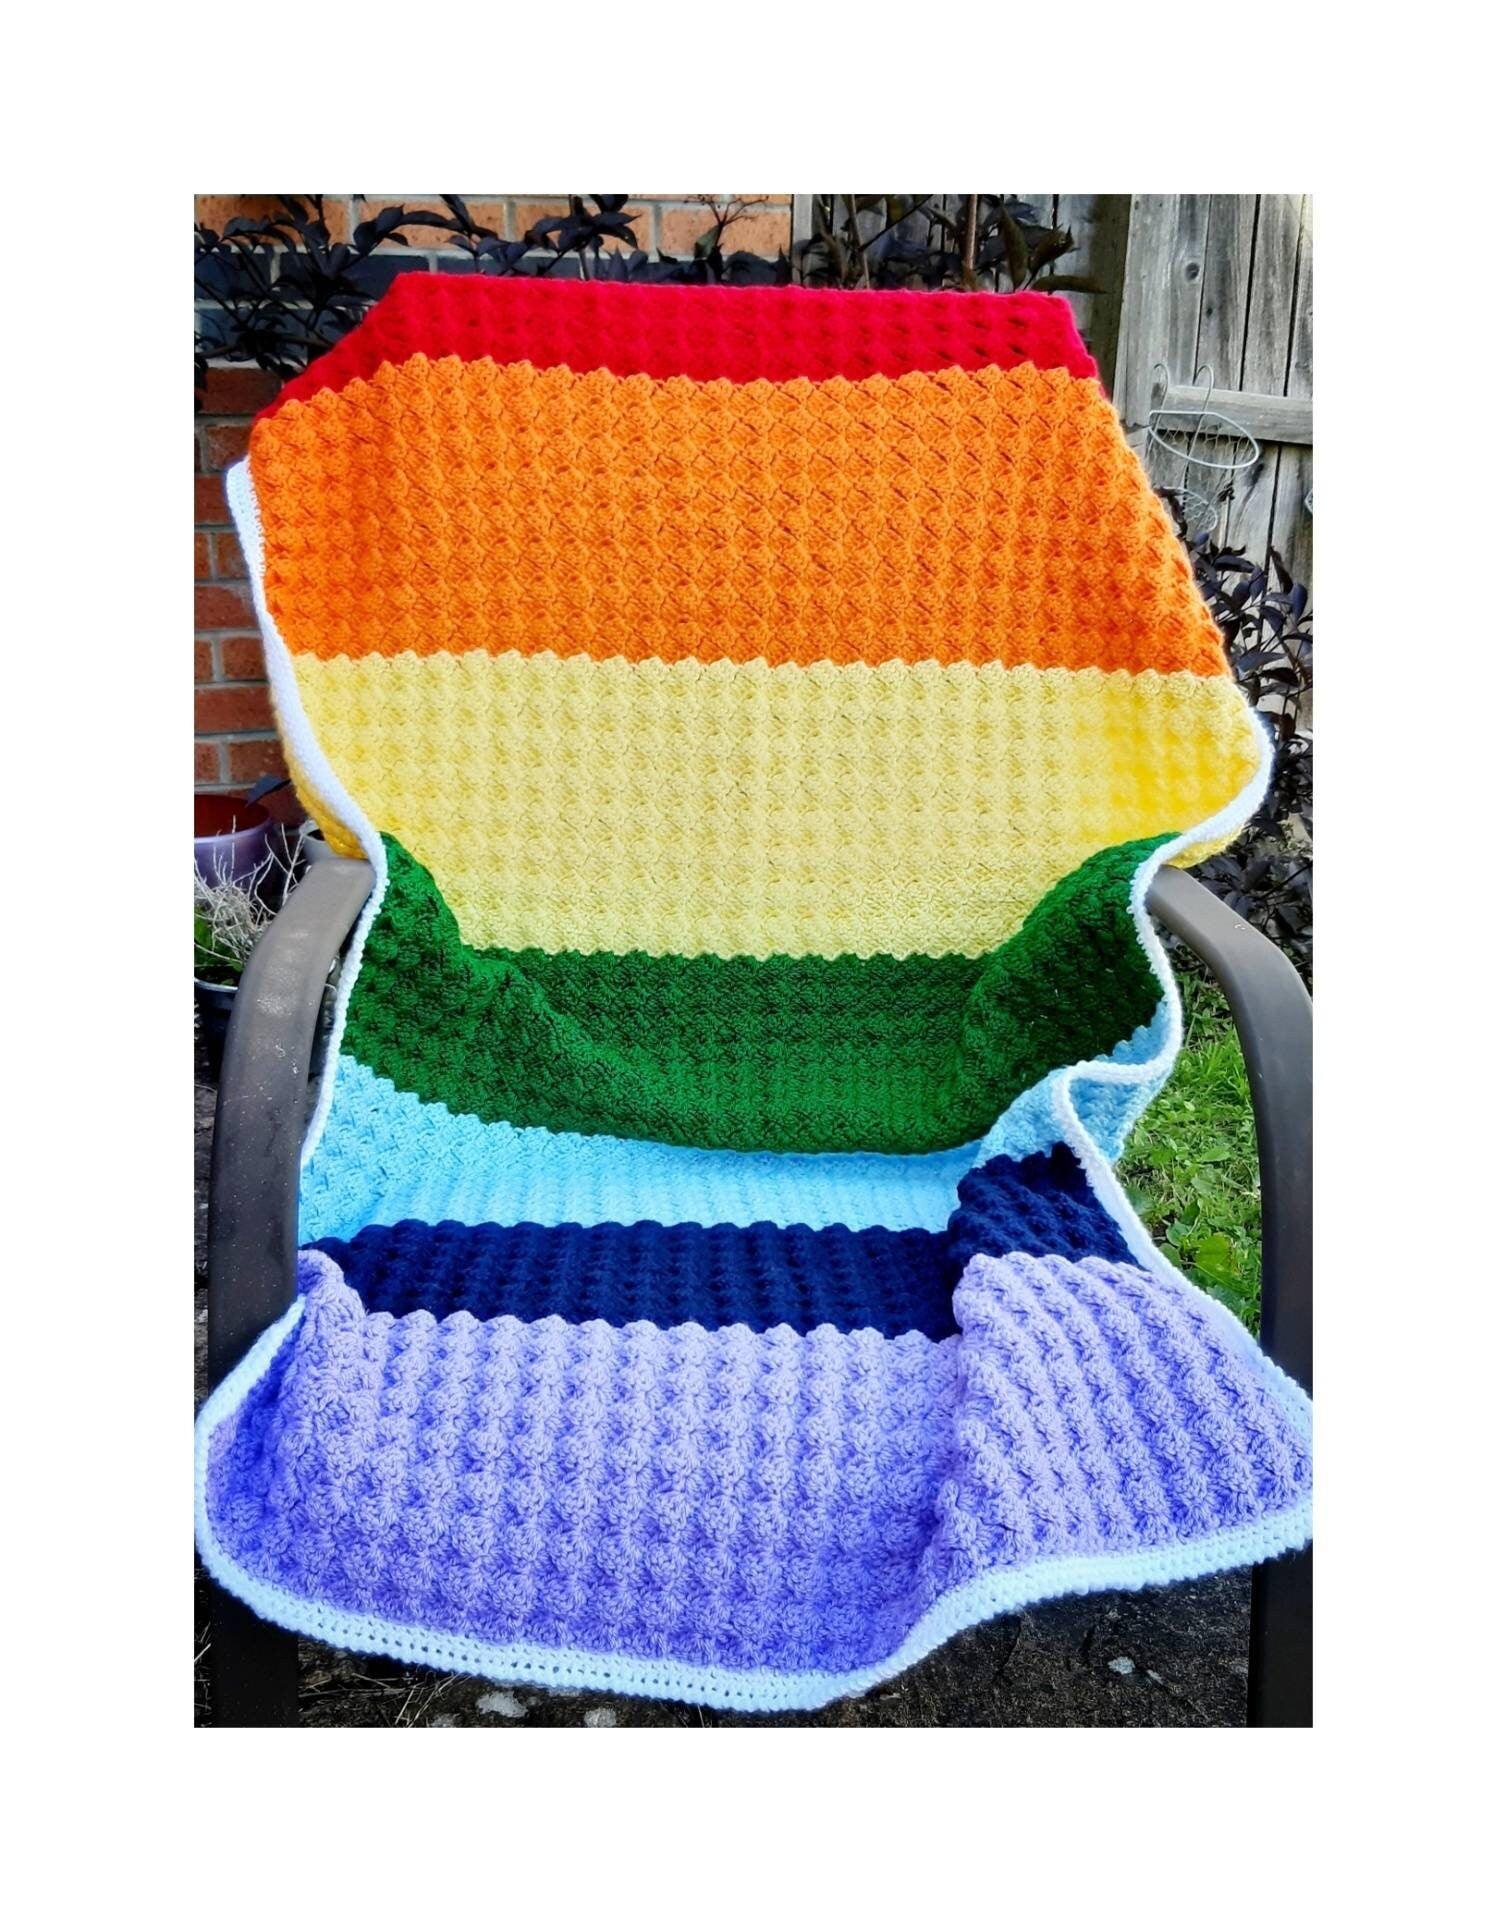 Handmade rainbow crochet blanket, striped with white edging. Shown in chair to illustrate sizing.Chakra colours